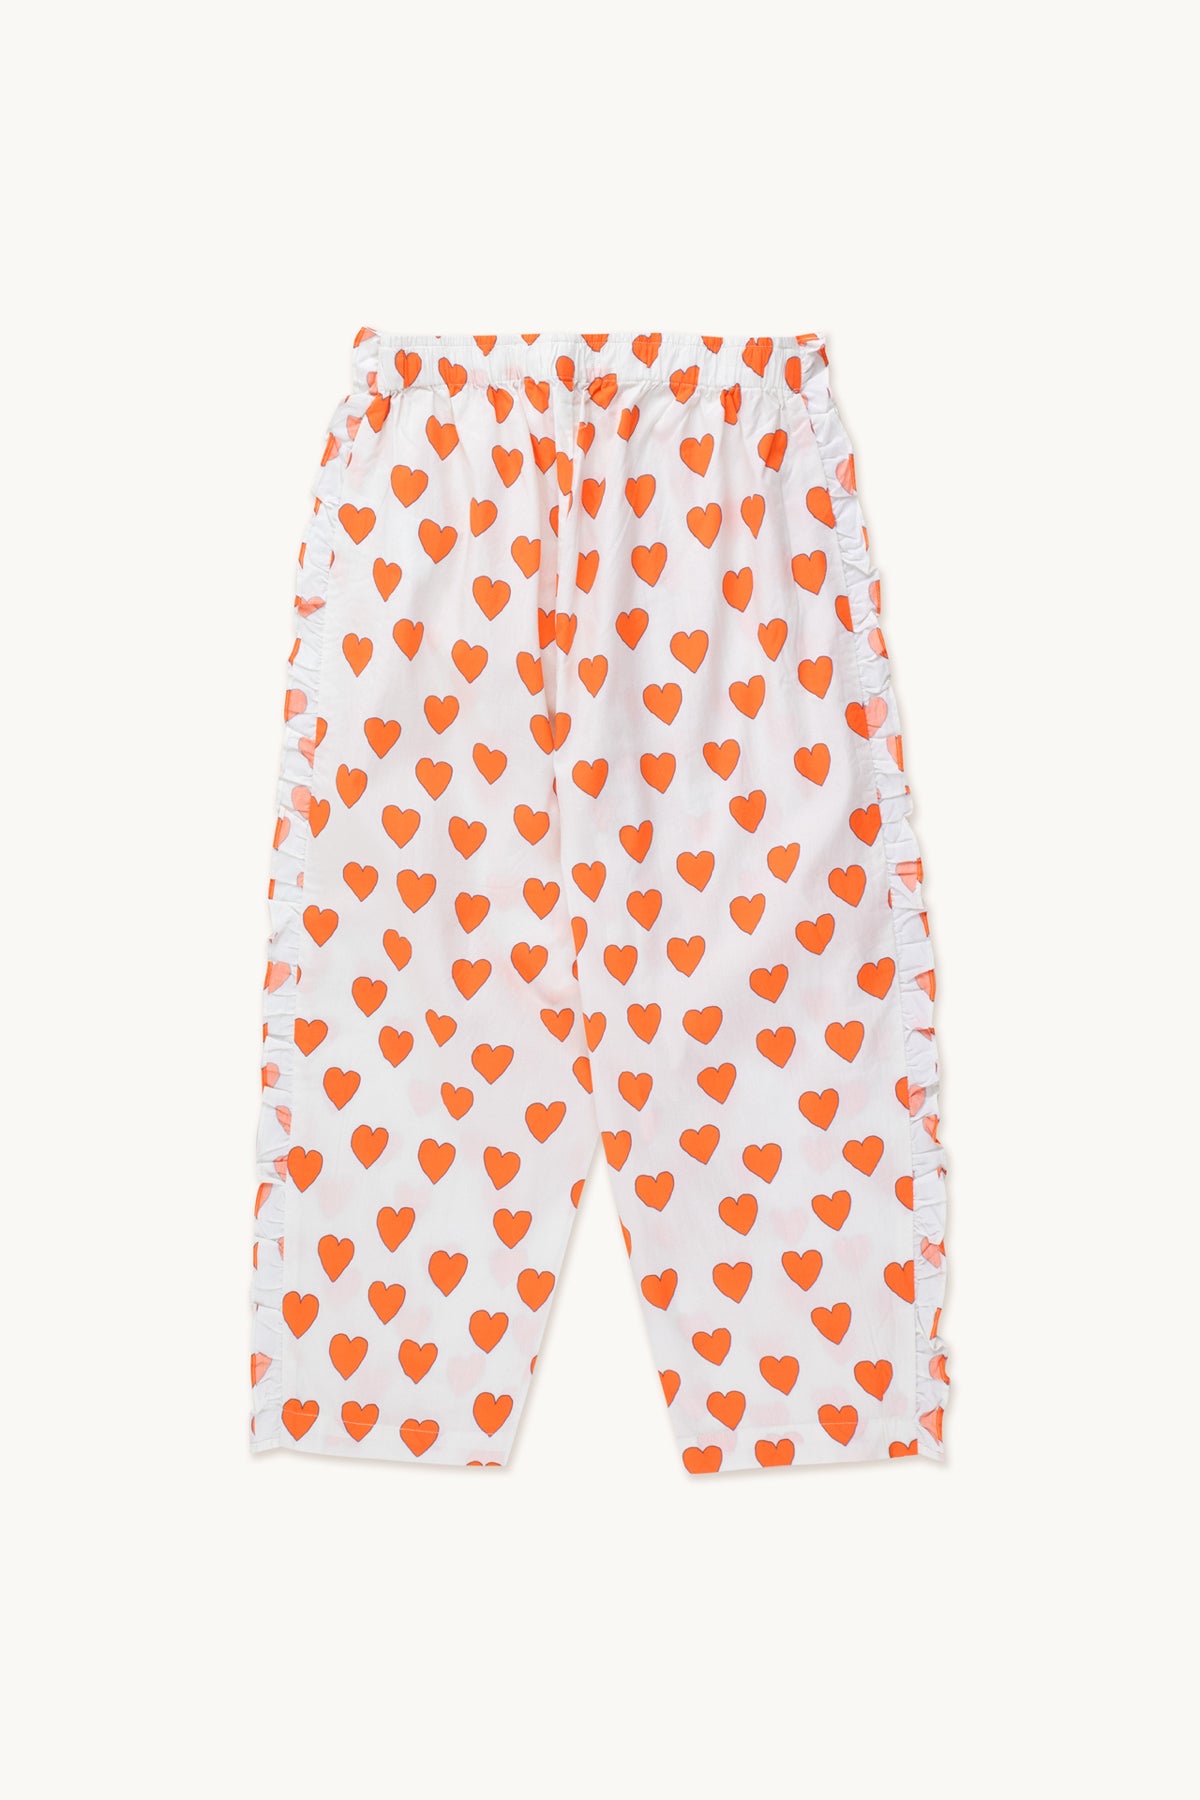 Tiny Cottons - hearts pants - off white